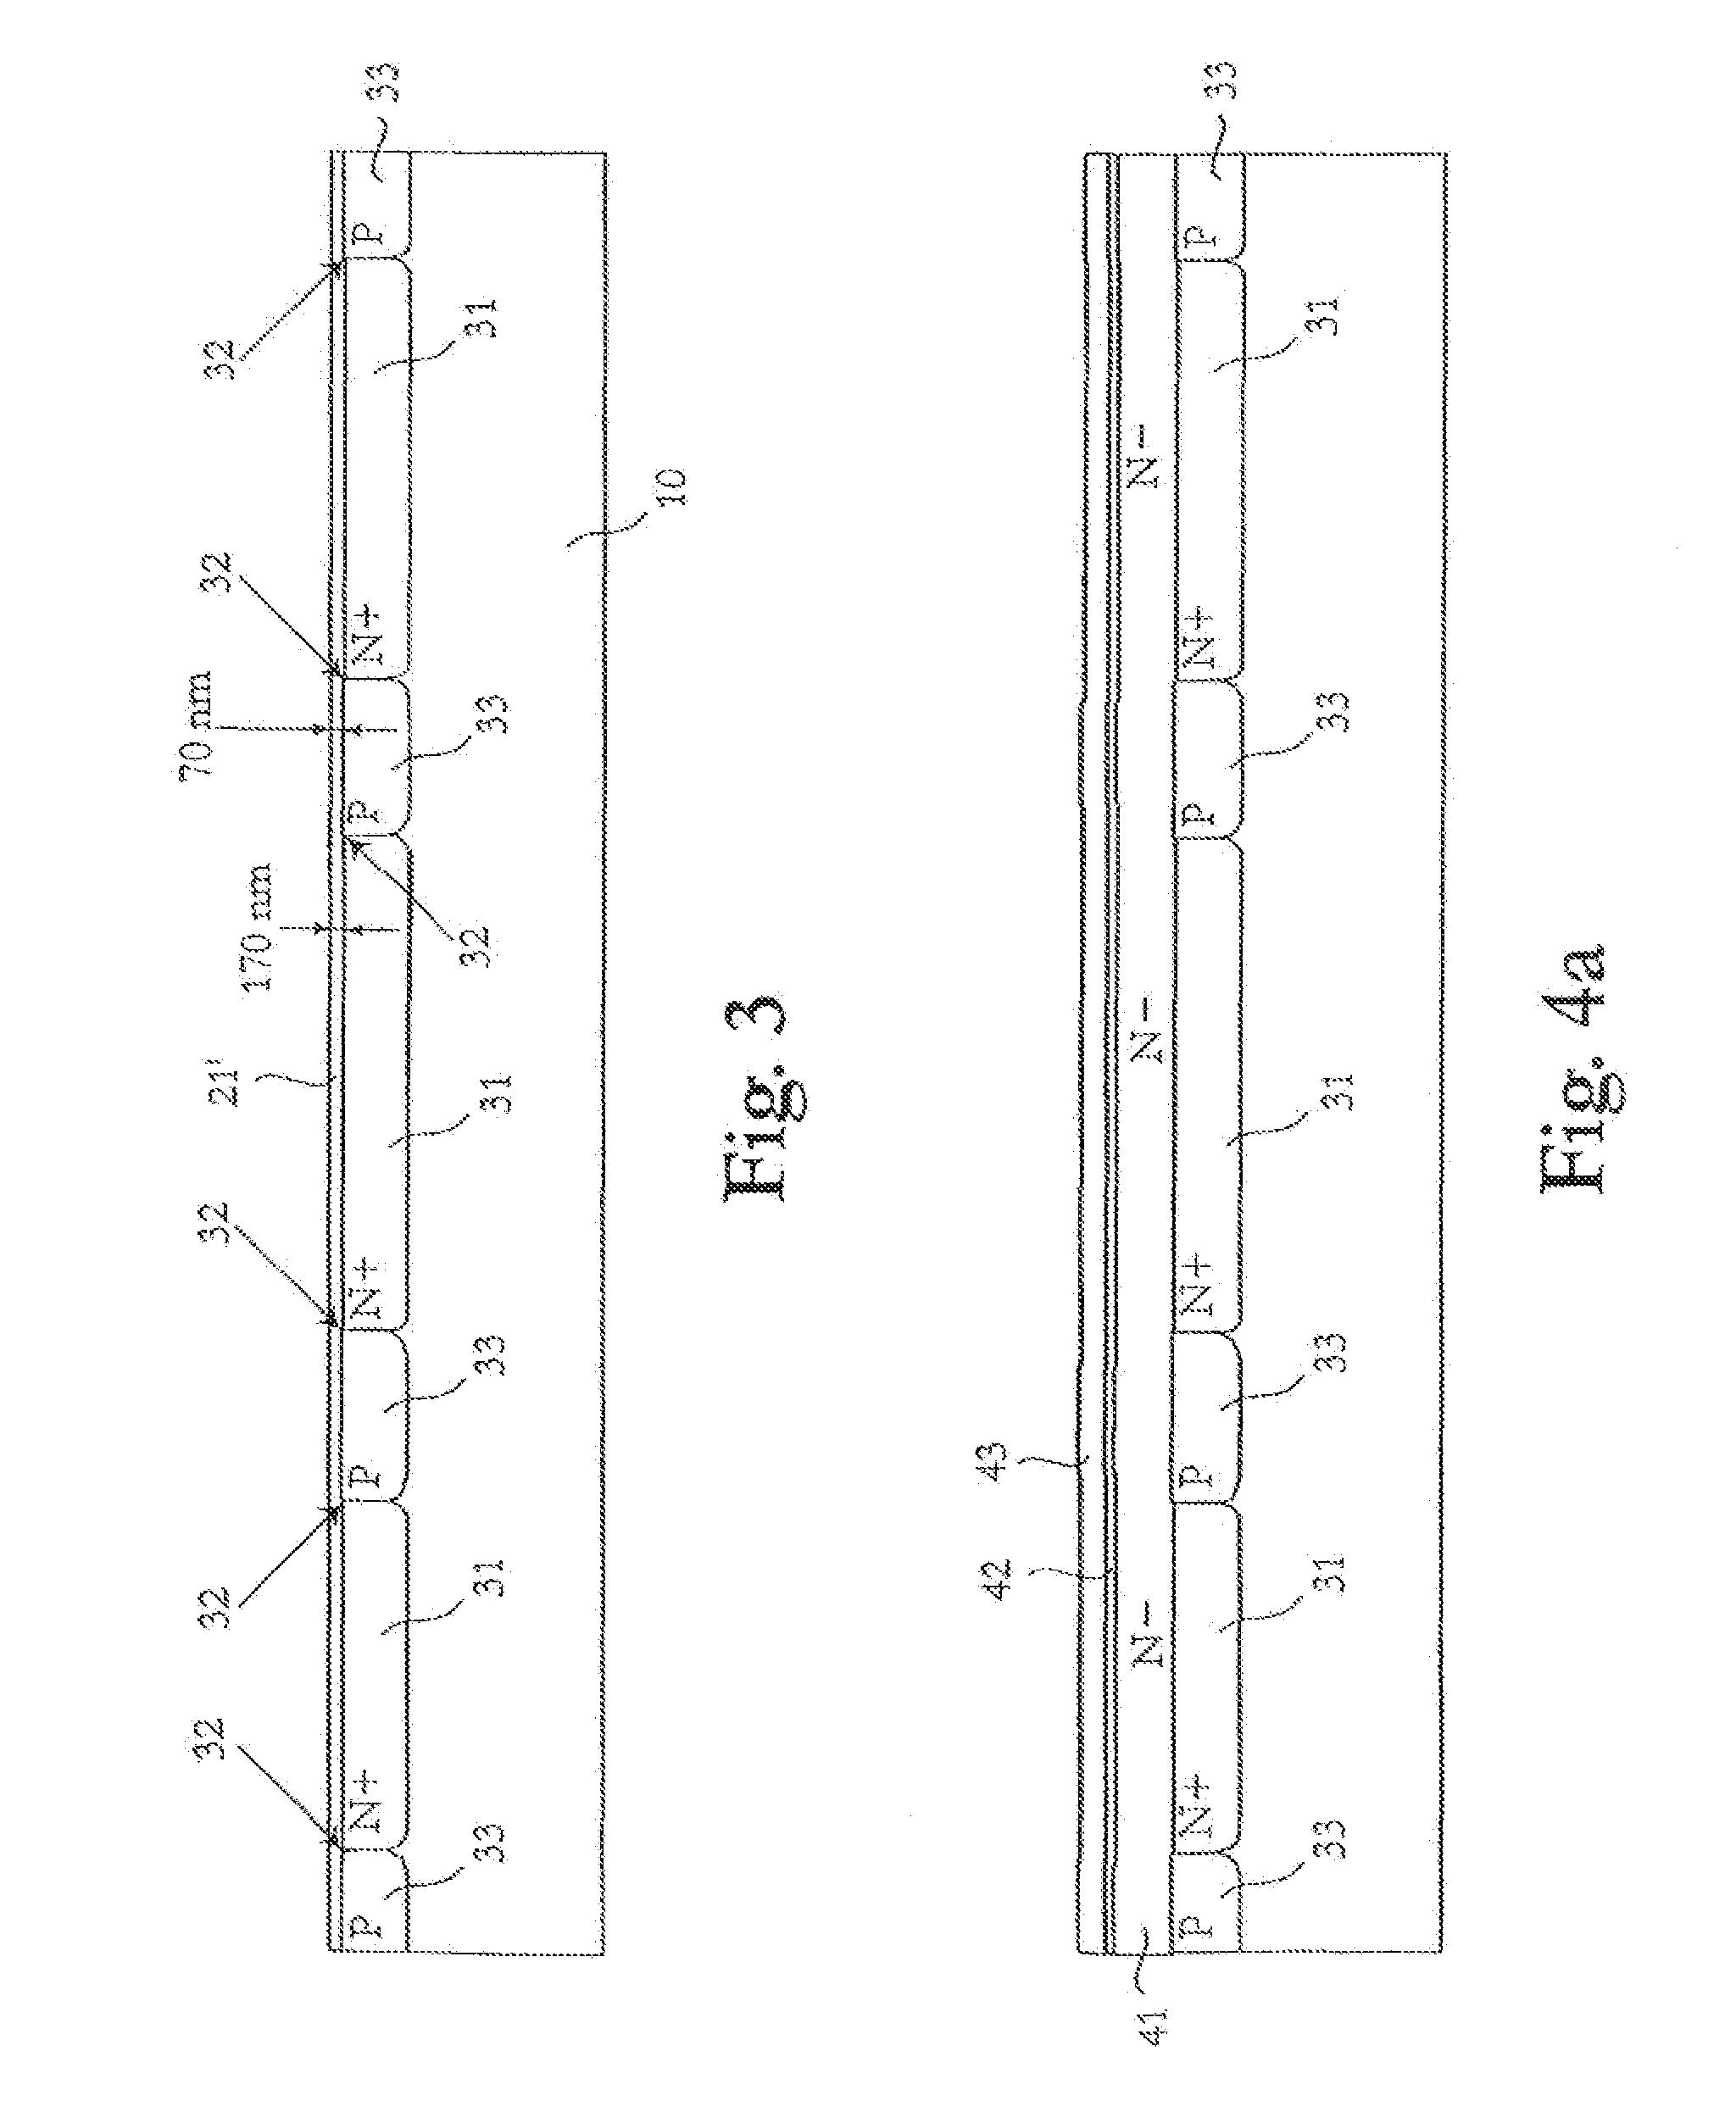 Semiconductor Process and Integrated Circuit